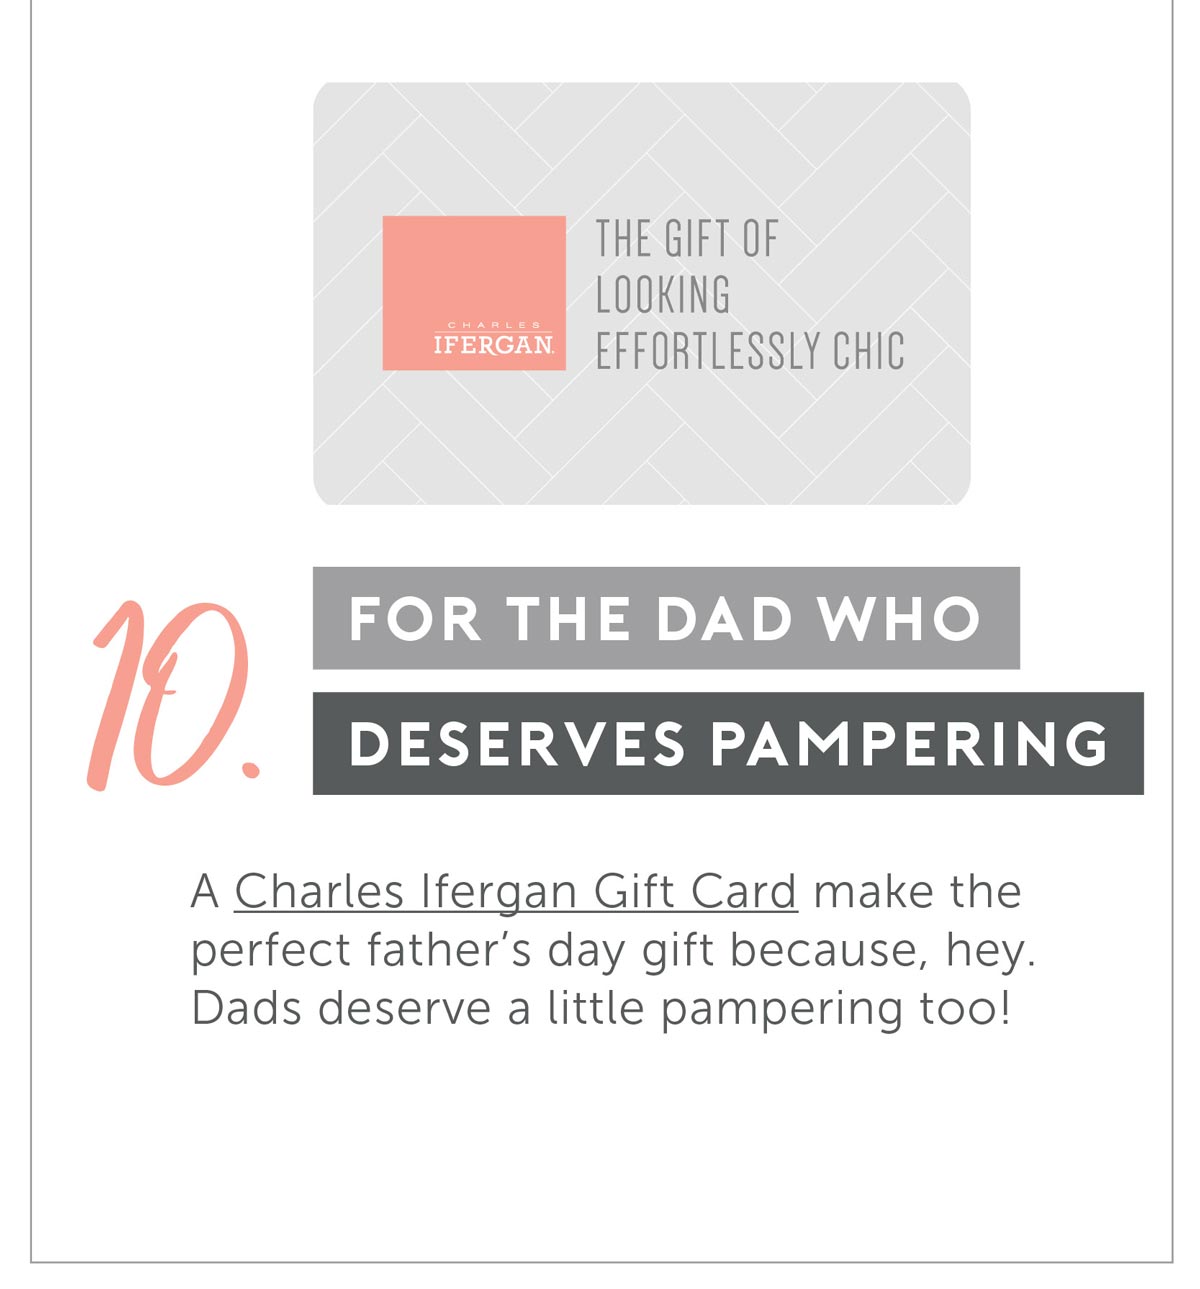 For A Dad That deserves Pampering. A Charles Ifergan Gift Card make the perfect father’s day gift because, hey. Dads deserve a little pampering too!